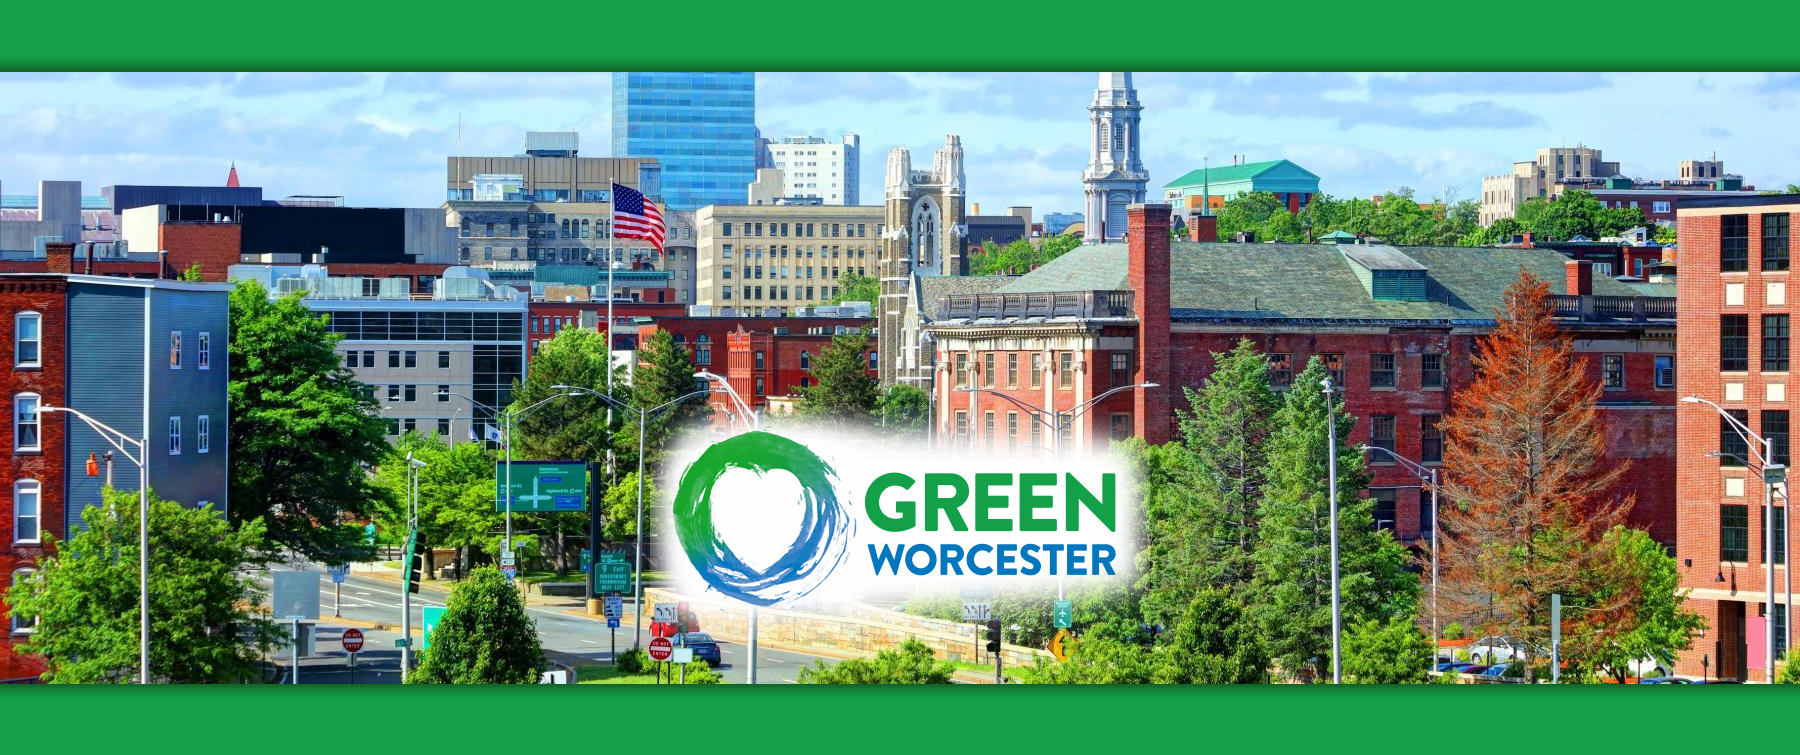 Downtown Worcester Buildings Skyline with Green Backdrop